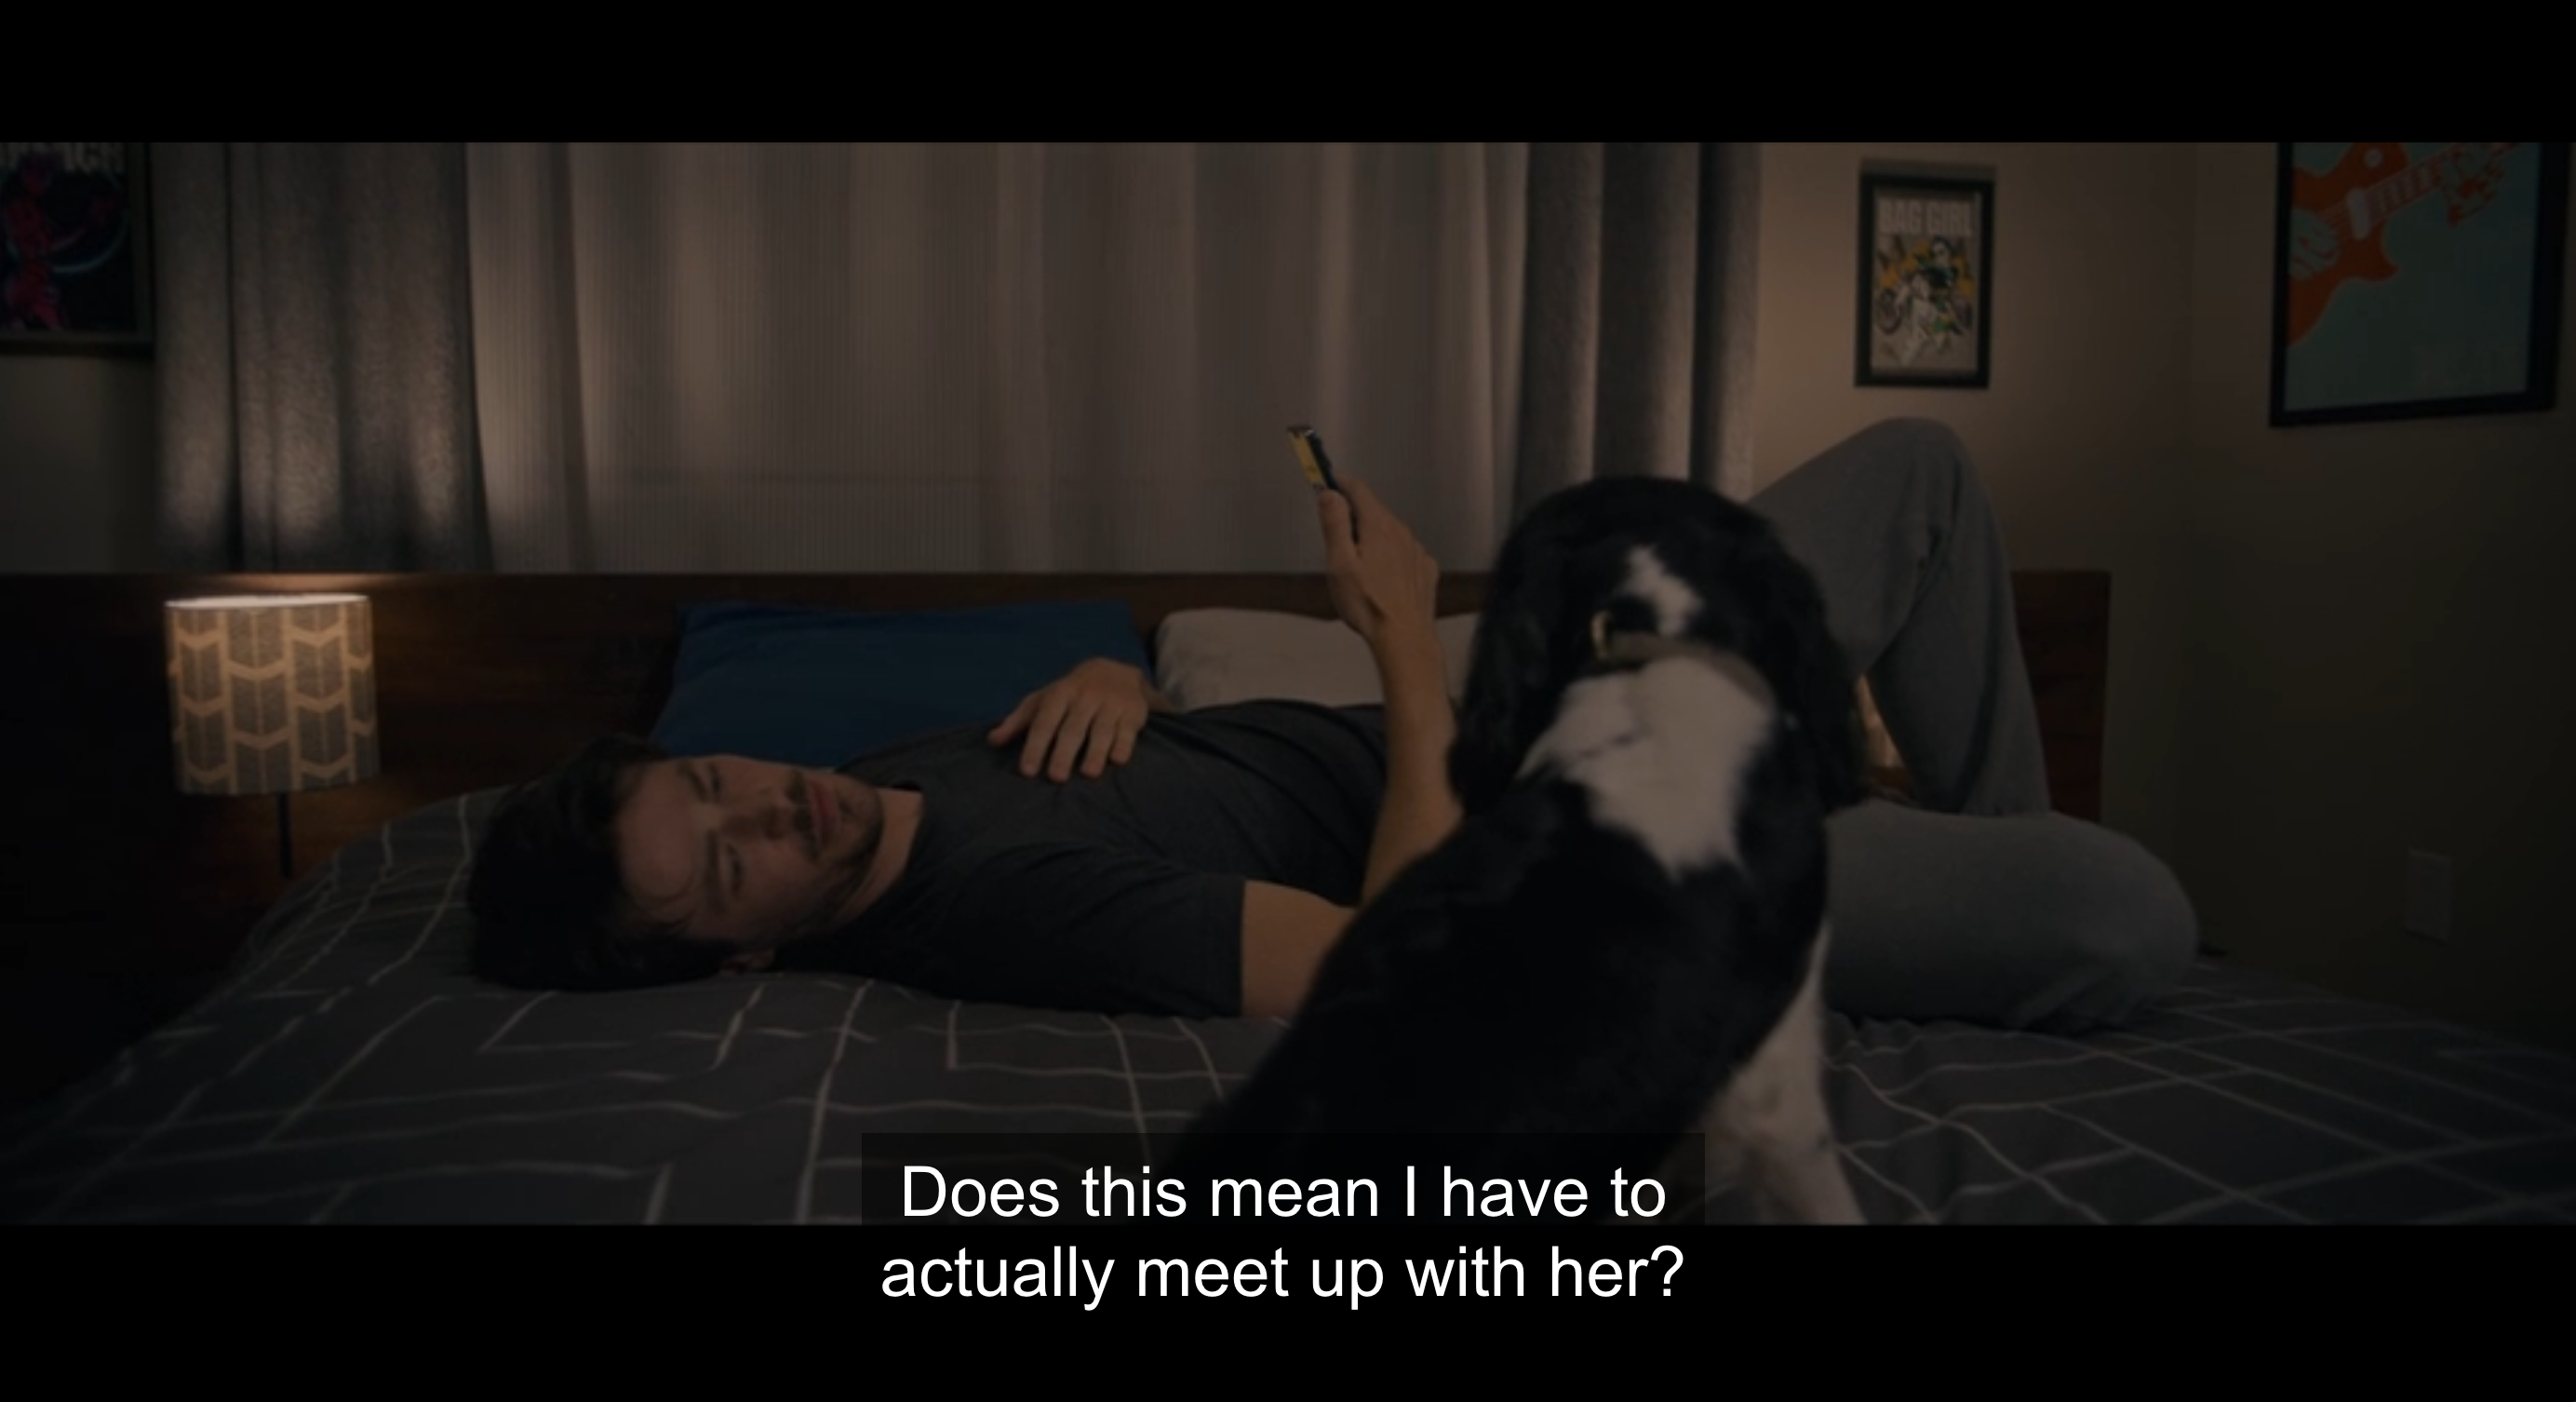 grant on floor talking to dog: does this mean i have to actually meet up with her?